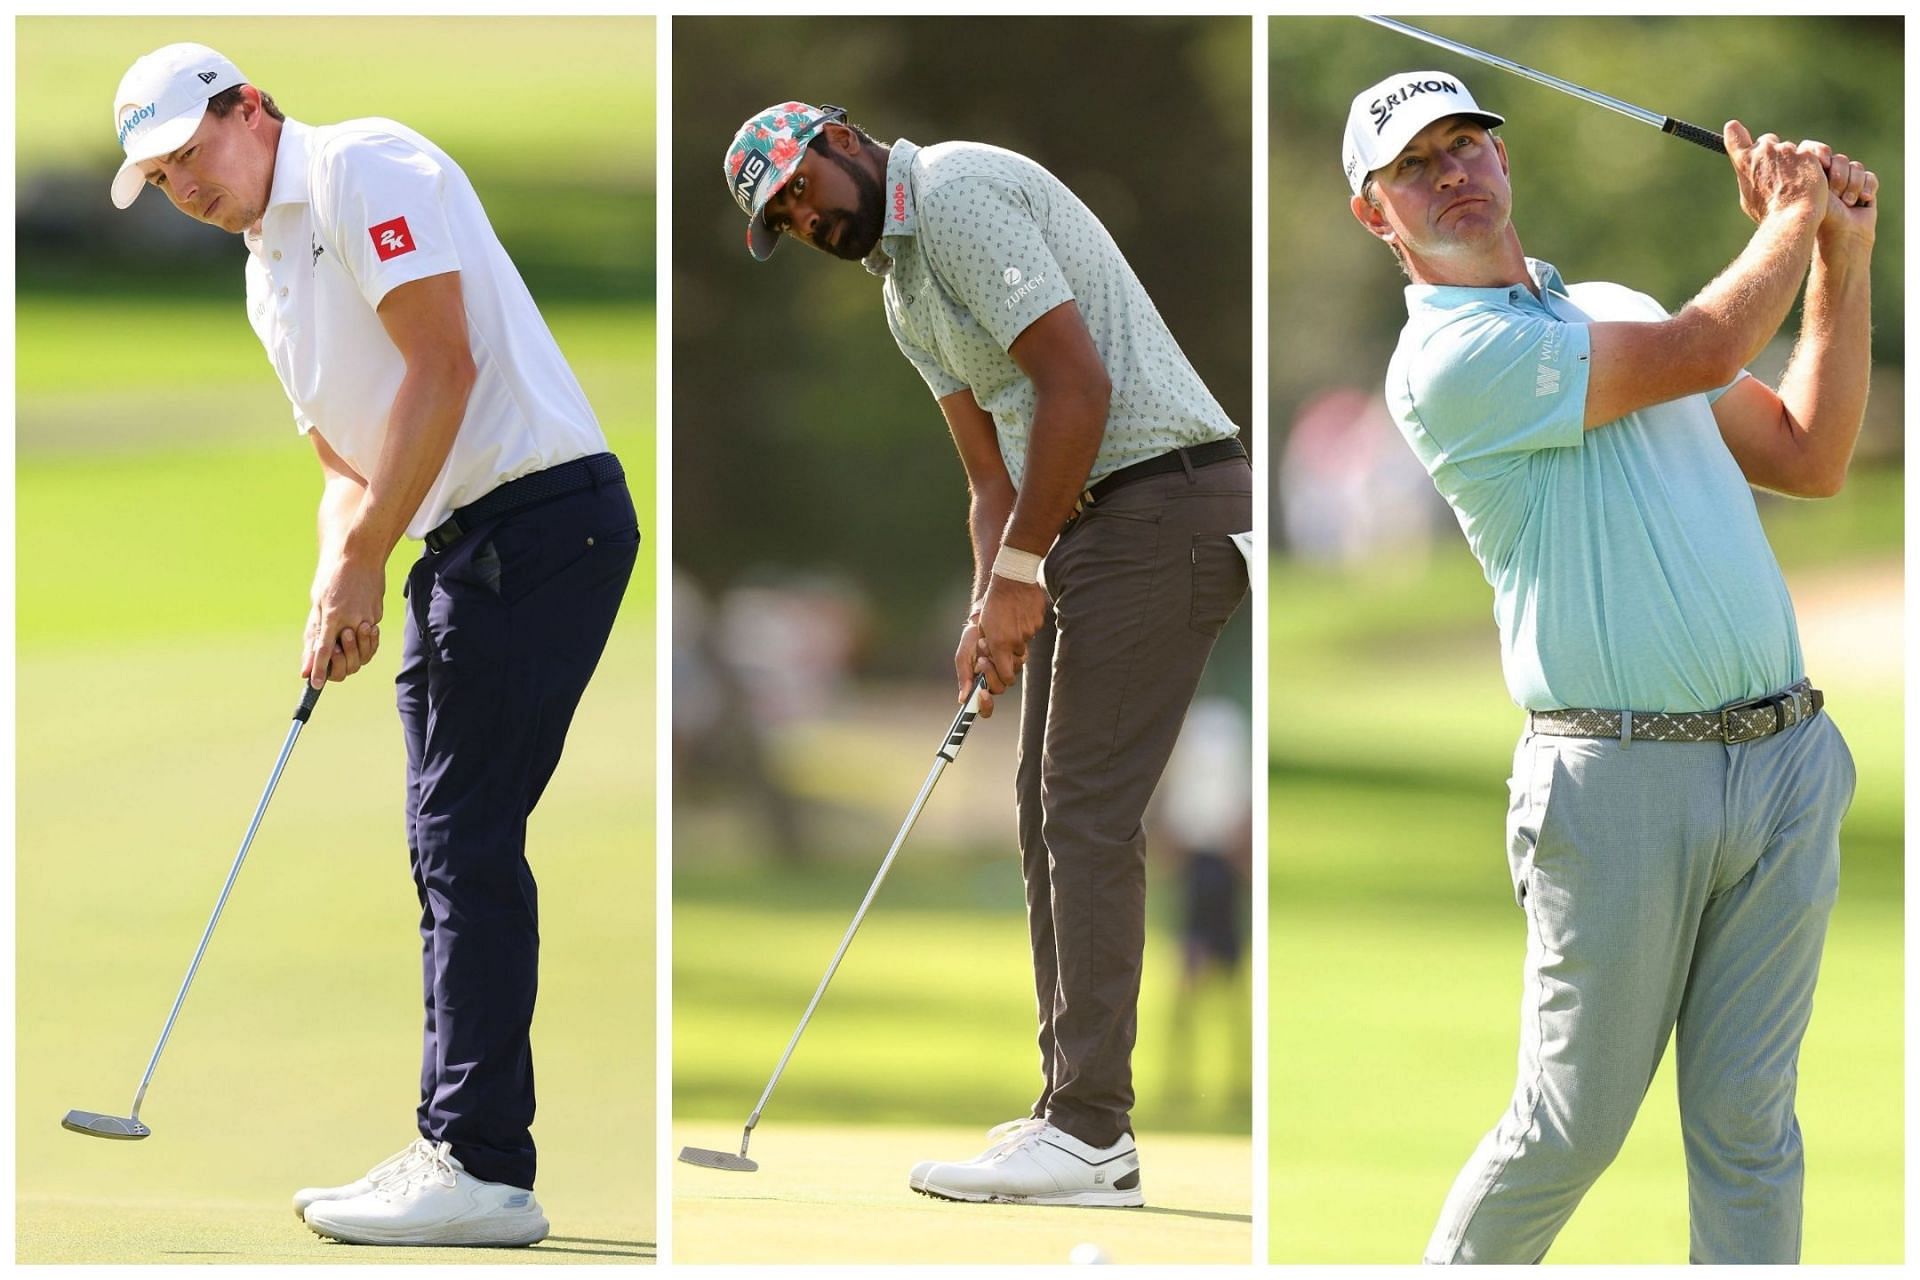 Matt Fitzpatrick, Sahith Theegala and Lucas Glover missed the cut at the Sony Open in Hawaii